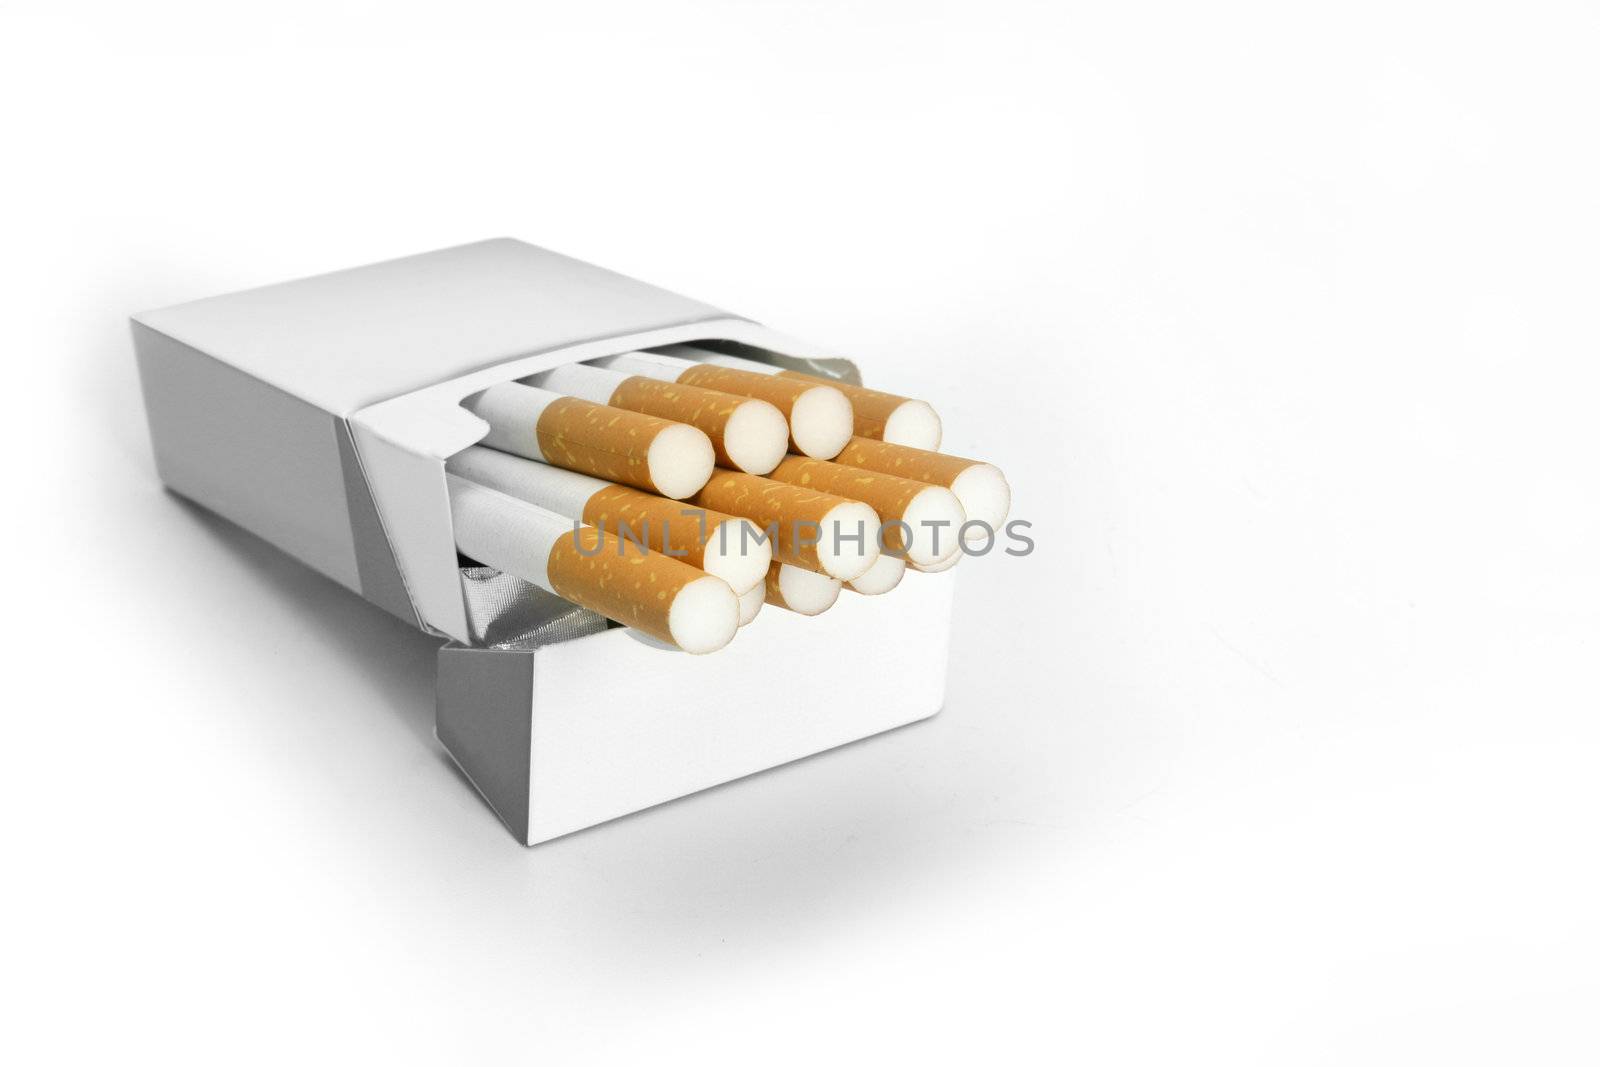 Packet of cigarettes by phovoir